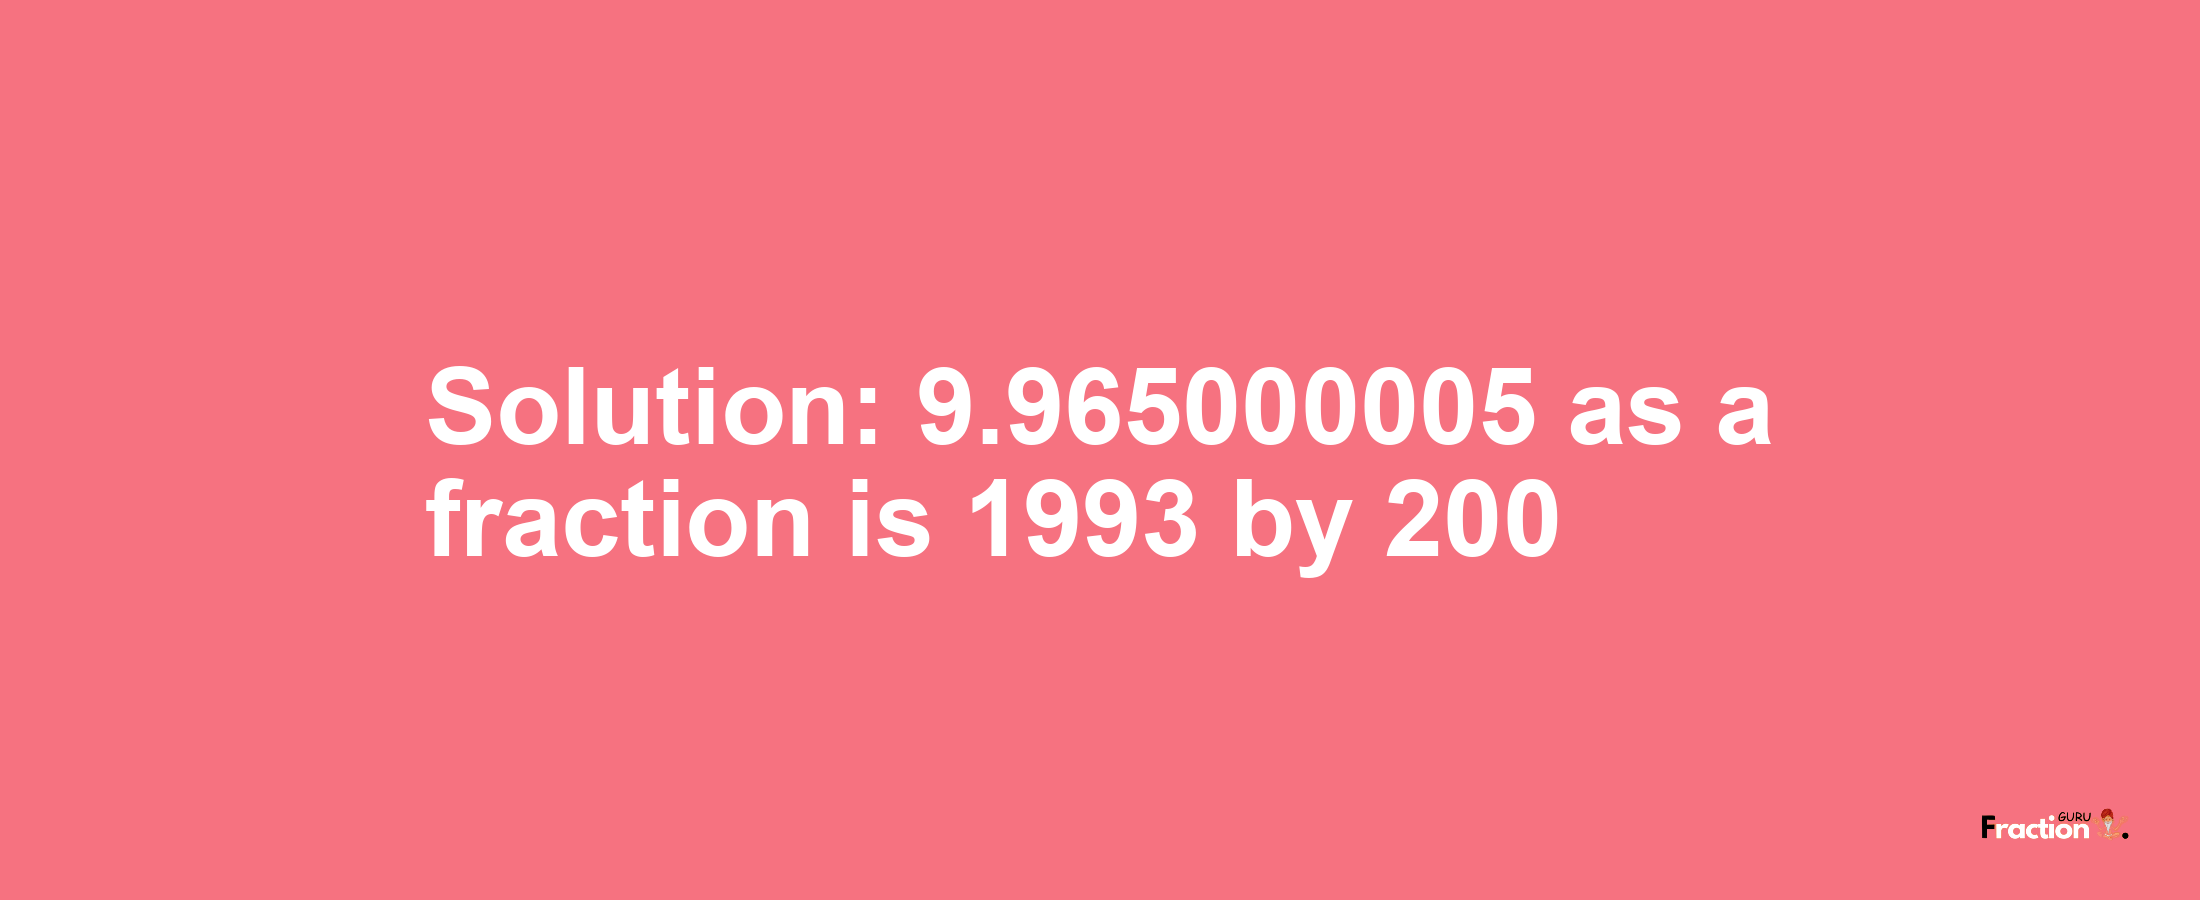 Solution:9.965000005 as a fraction is 1993/200